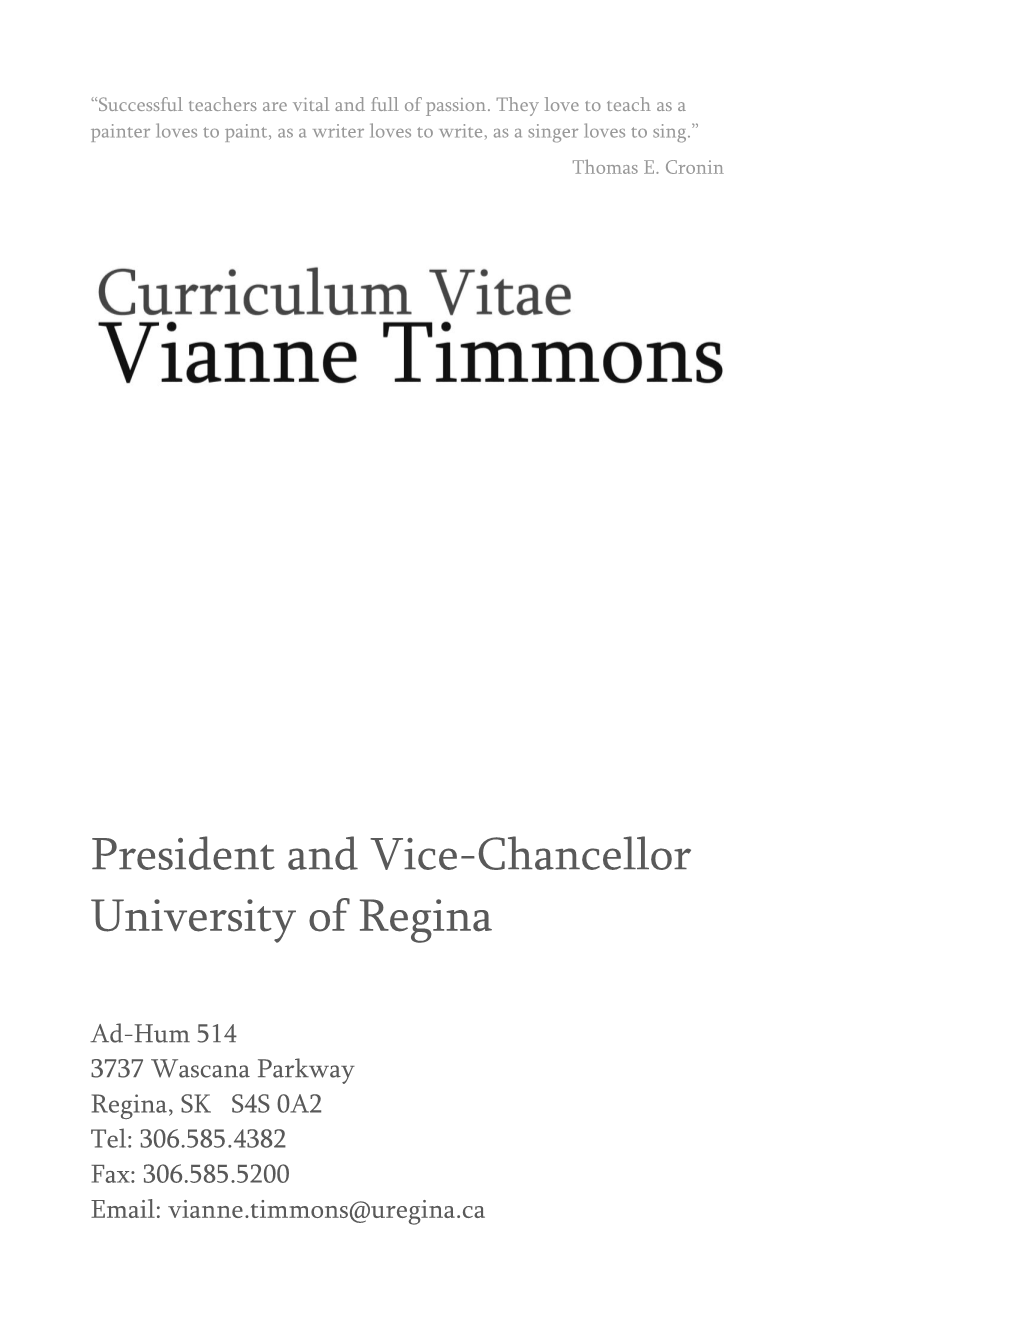 President and Vice-Chancellor University of Regina